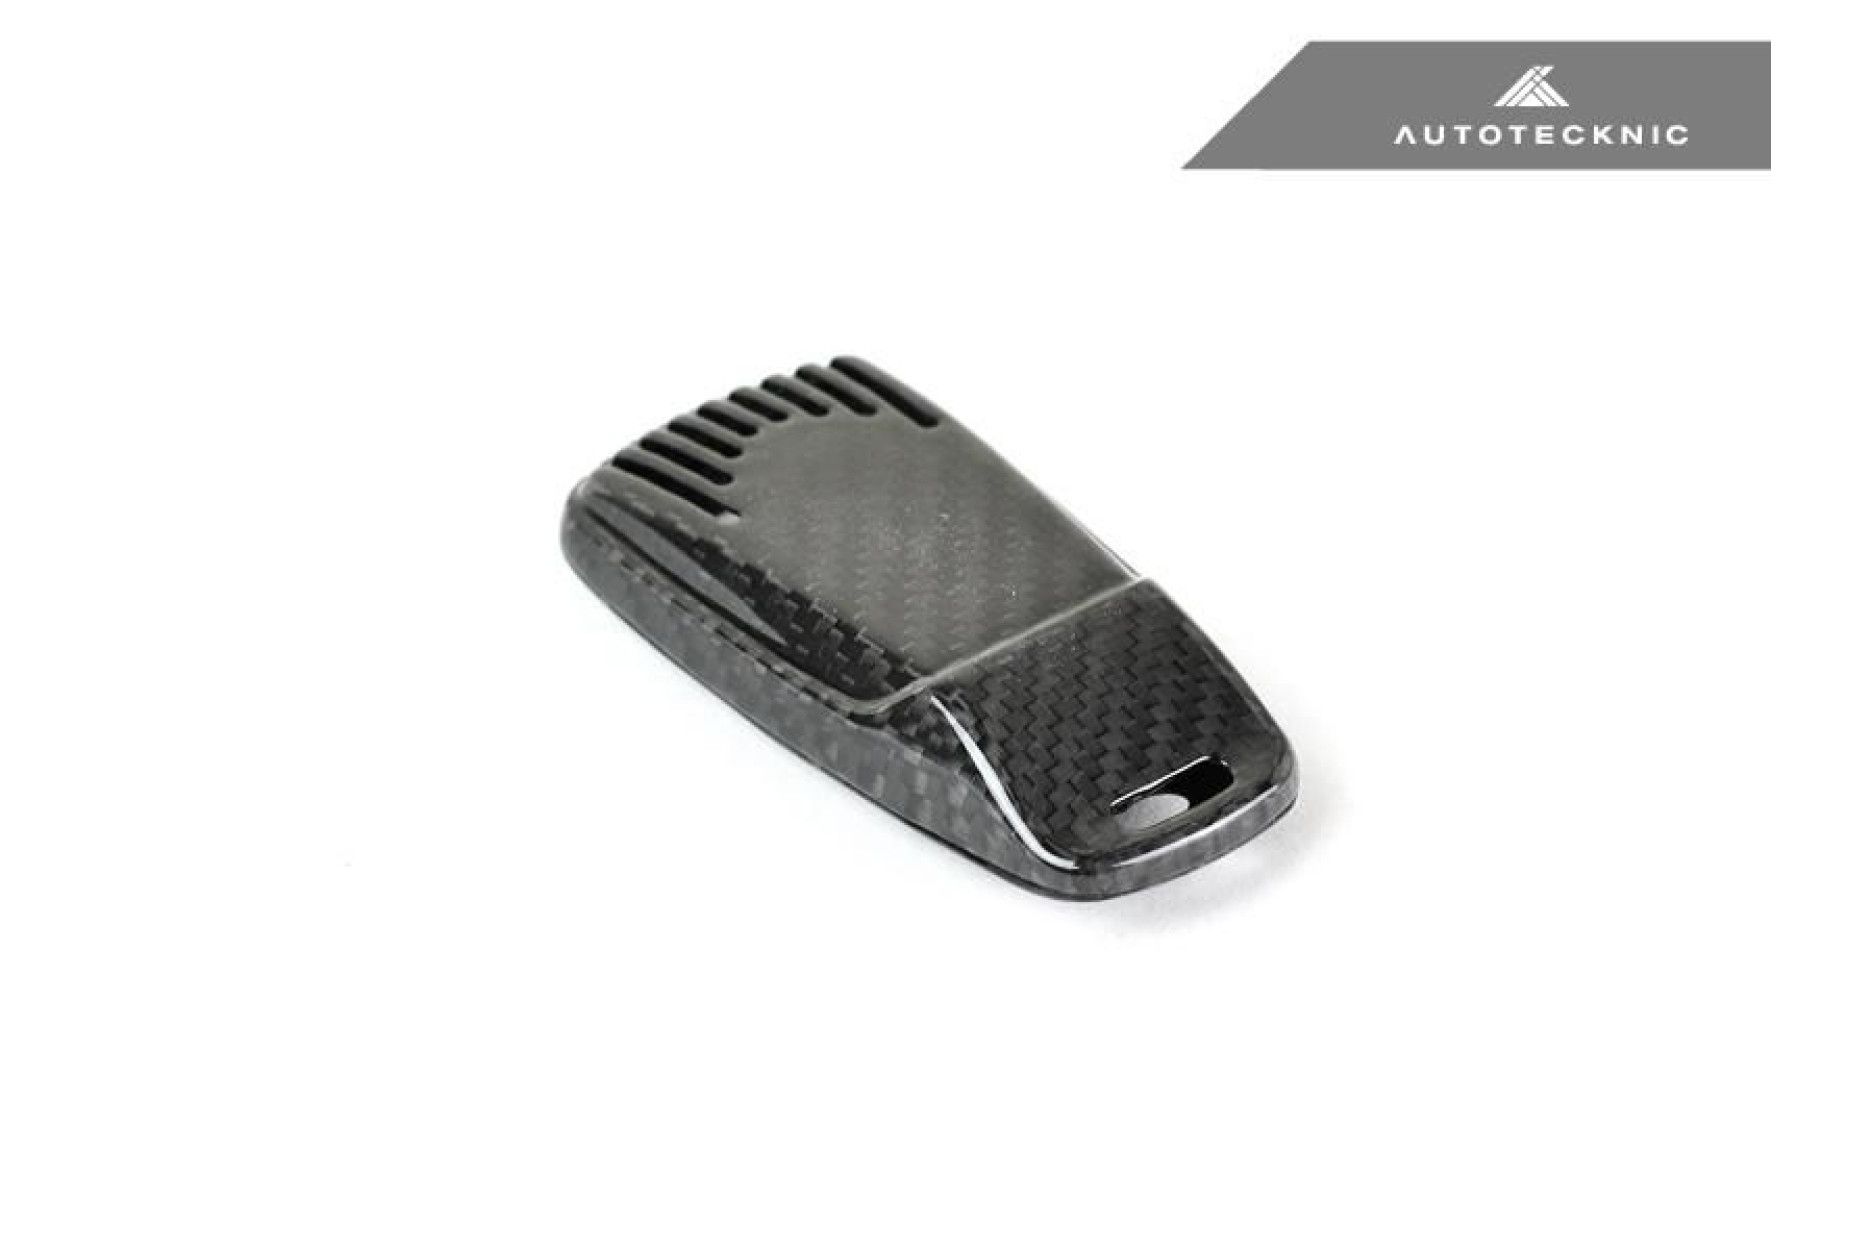 AutoTecknic Dry Carbon Key Case - Audi Vehicles 17-Up - buy online at CFD